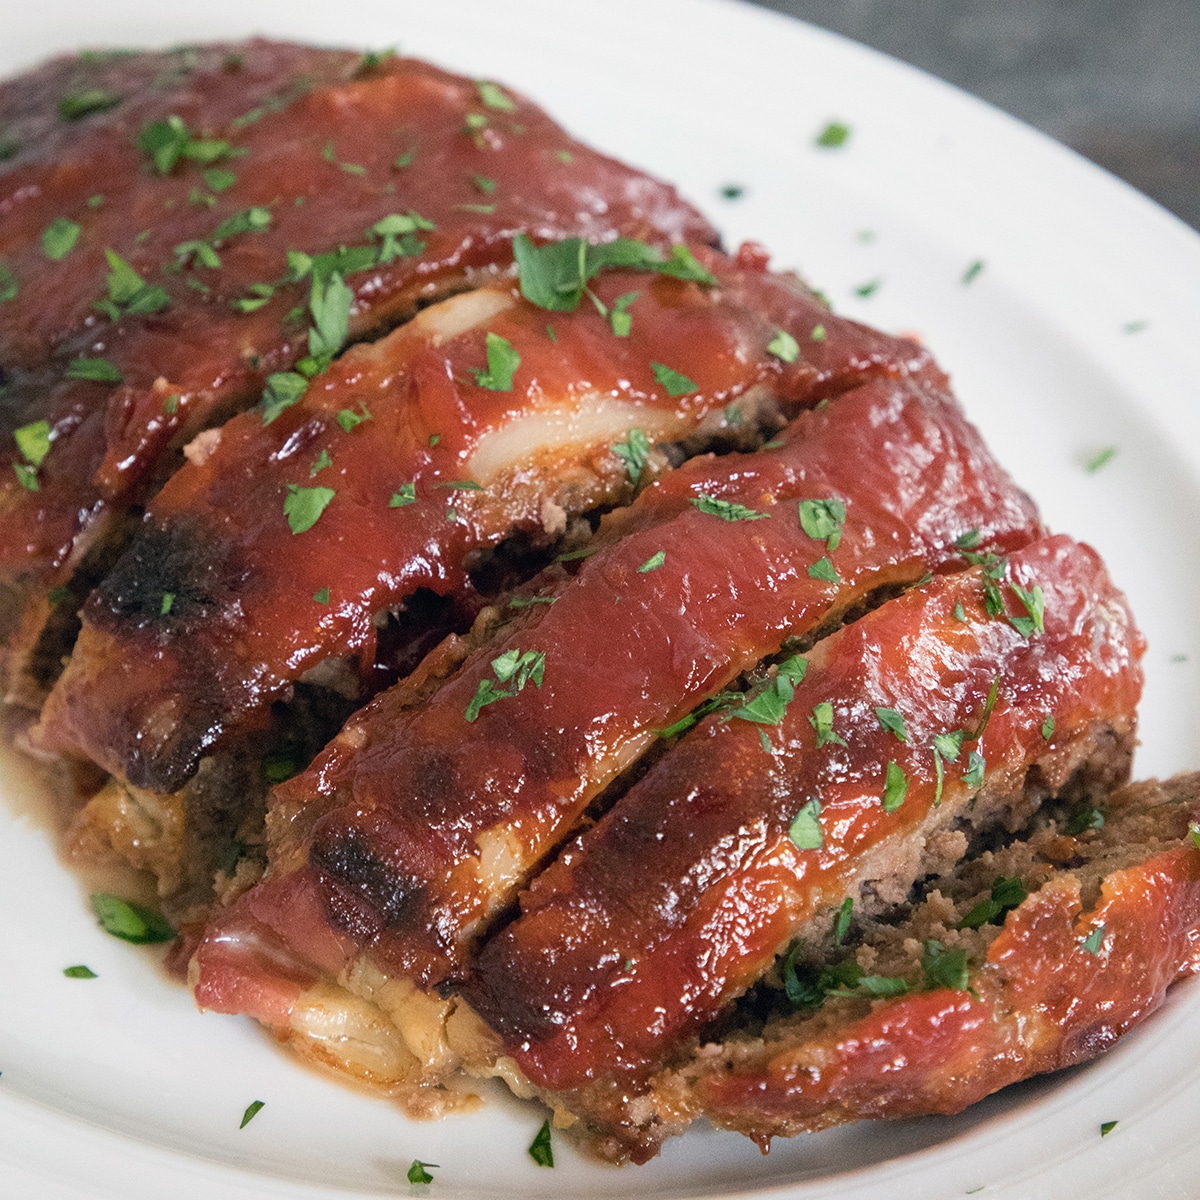 Closeup view of Bacon Meatloaf from the Pioneer Woman sliced on a white platter and covered in sauce and parsley